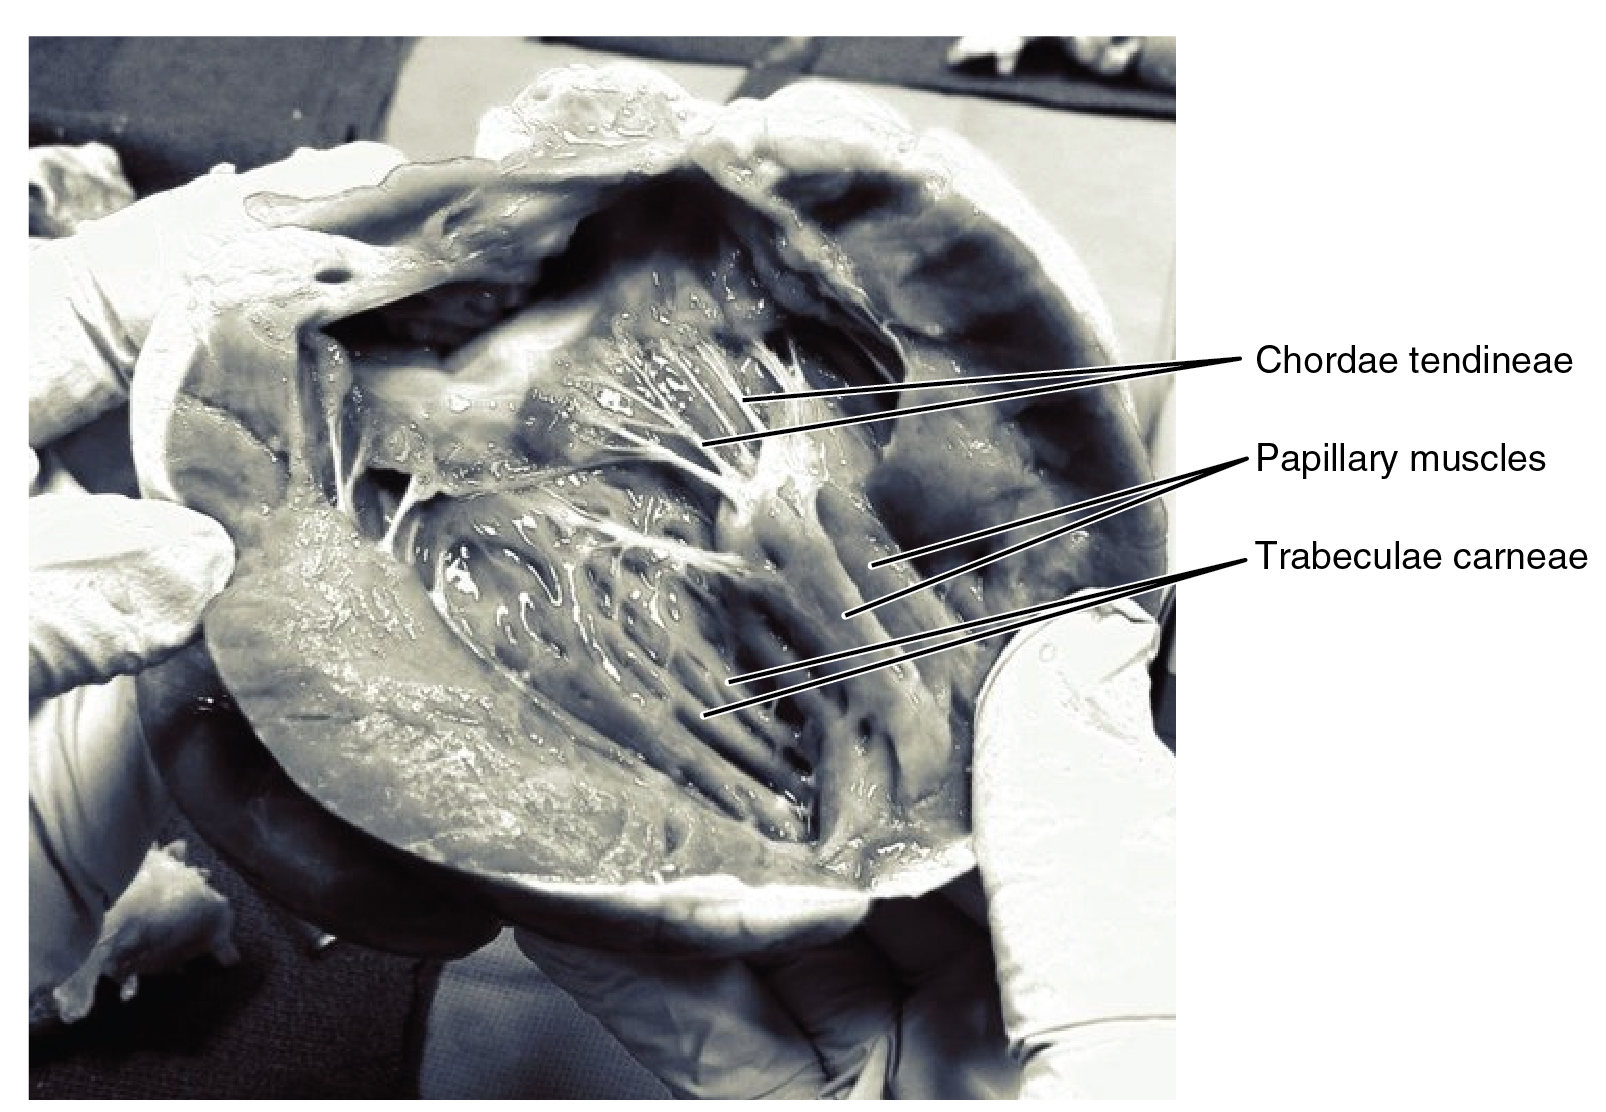 This photo shows the inside of the heart with the main muscles labeled.